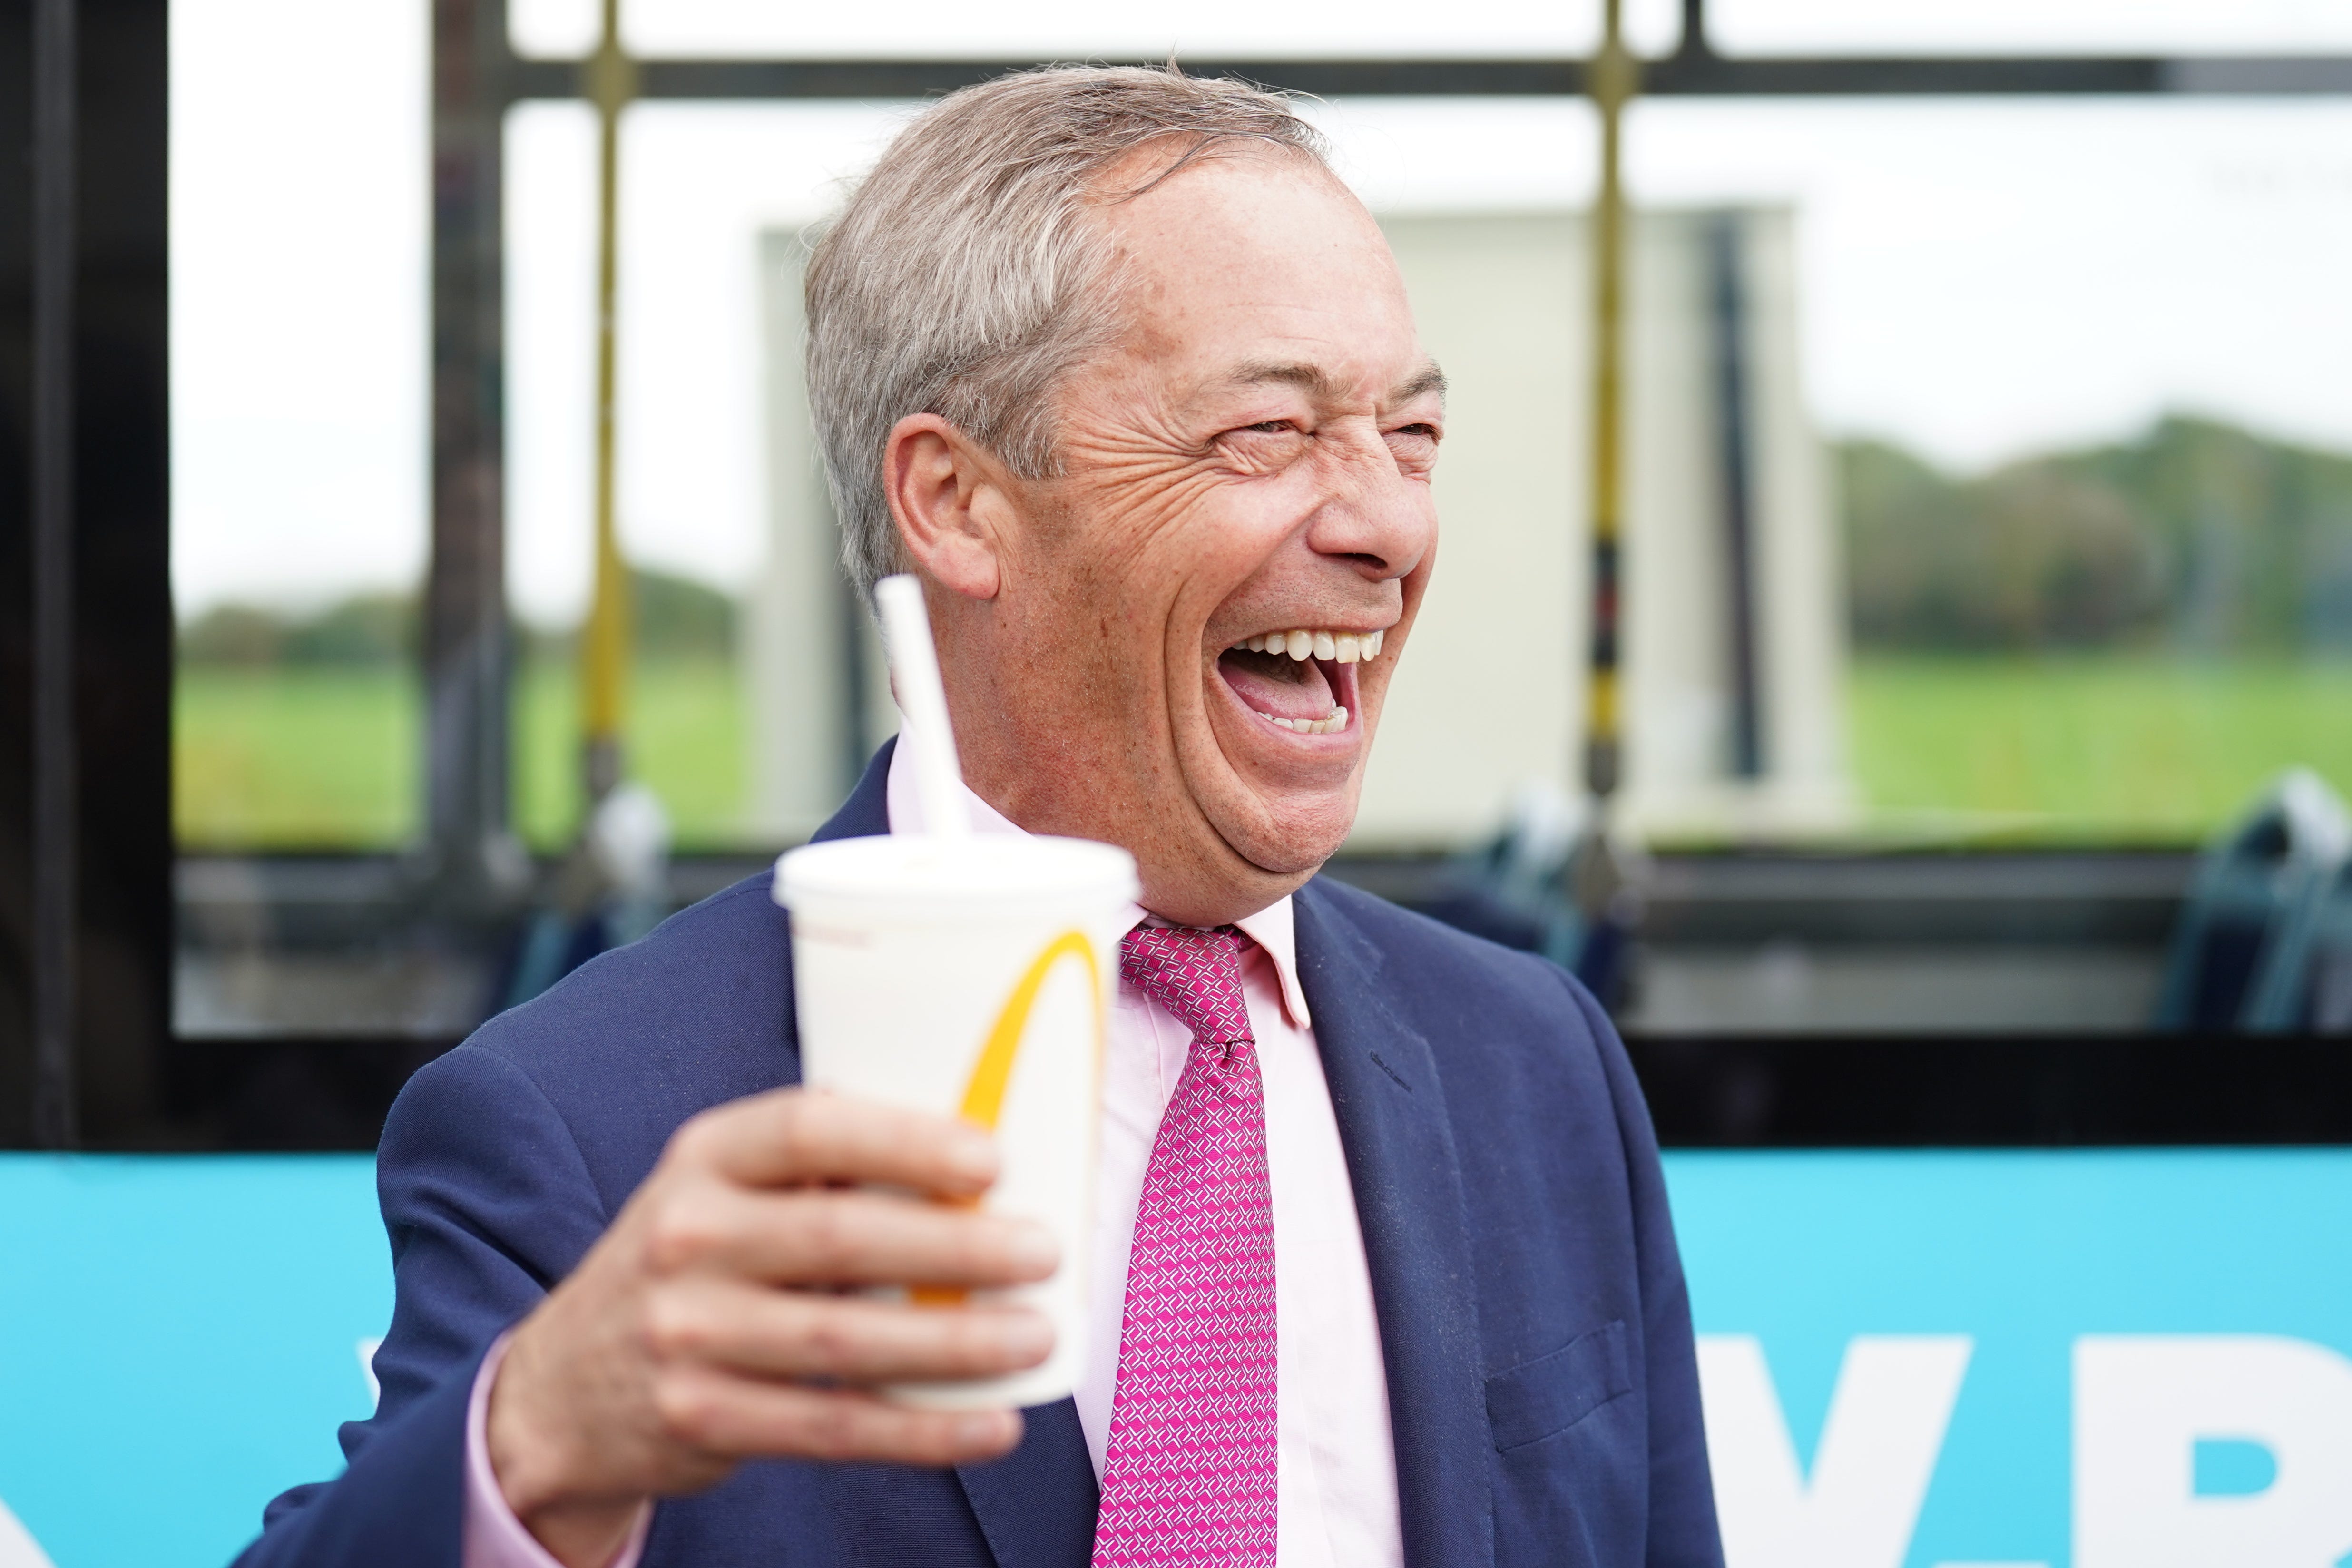 Nigel Farage’s Reform party looks set to win 13 seats at Westminster (James Manning/PA)